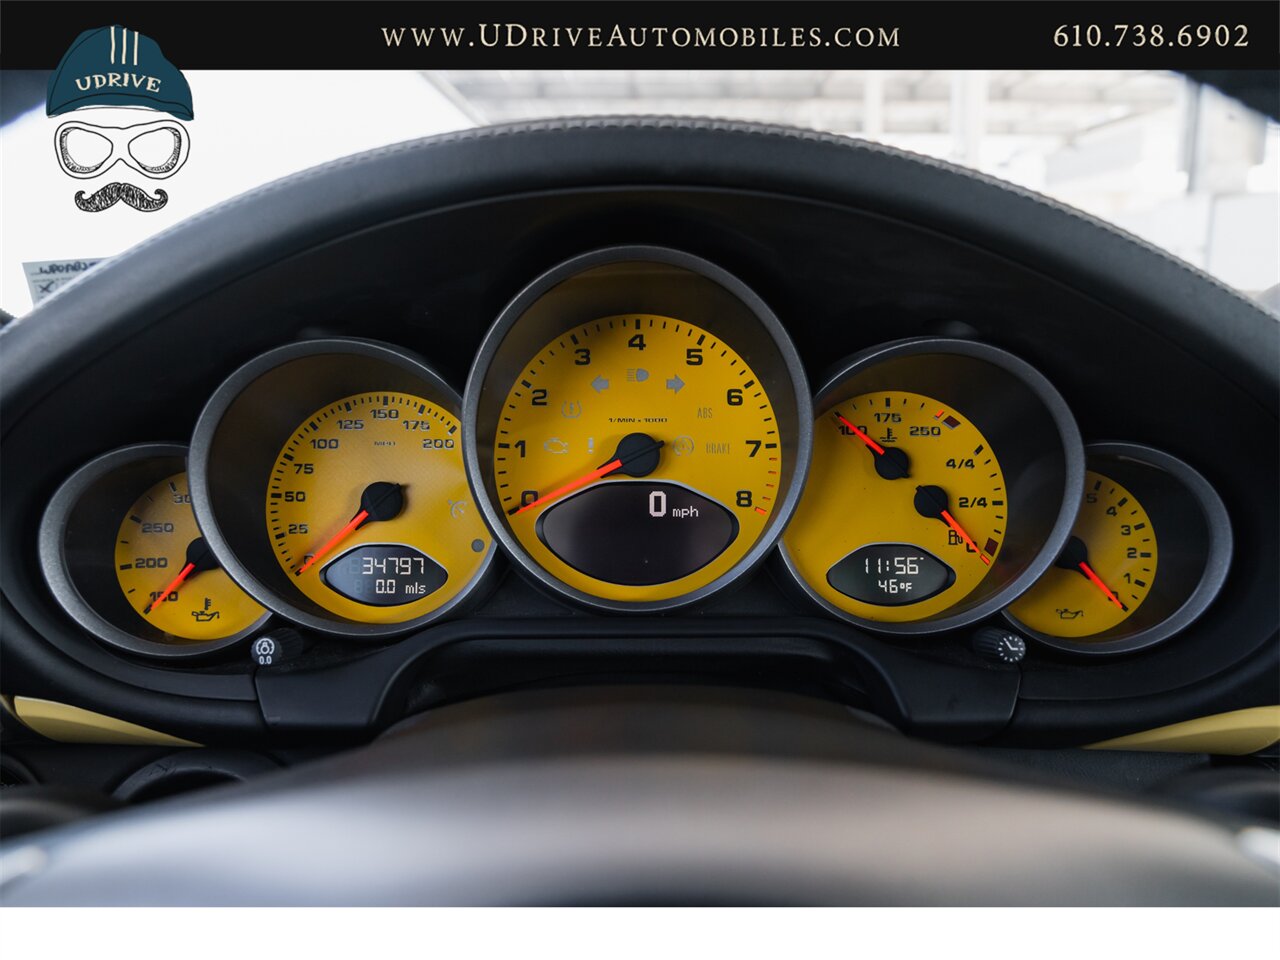 2007 Porsche 911 Carrera 4S 997 C4S Paint To Sample Pastel Yellow  6 Speed Sport Chrono Full Leather Yellow Gauges - Photo 32 - West Chester, PA 19382